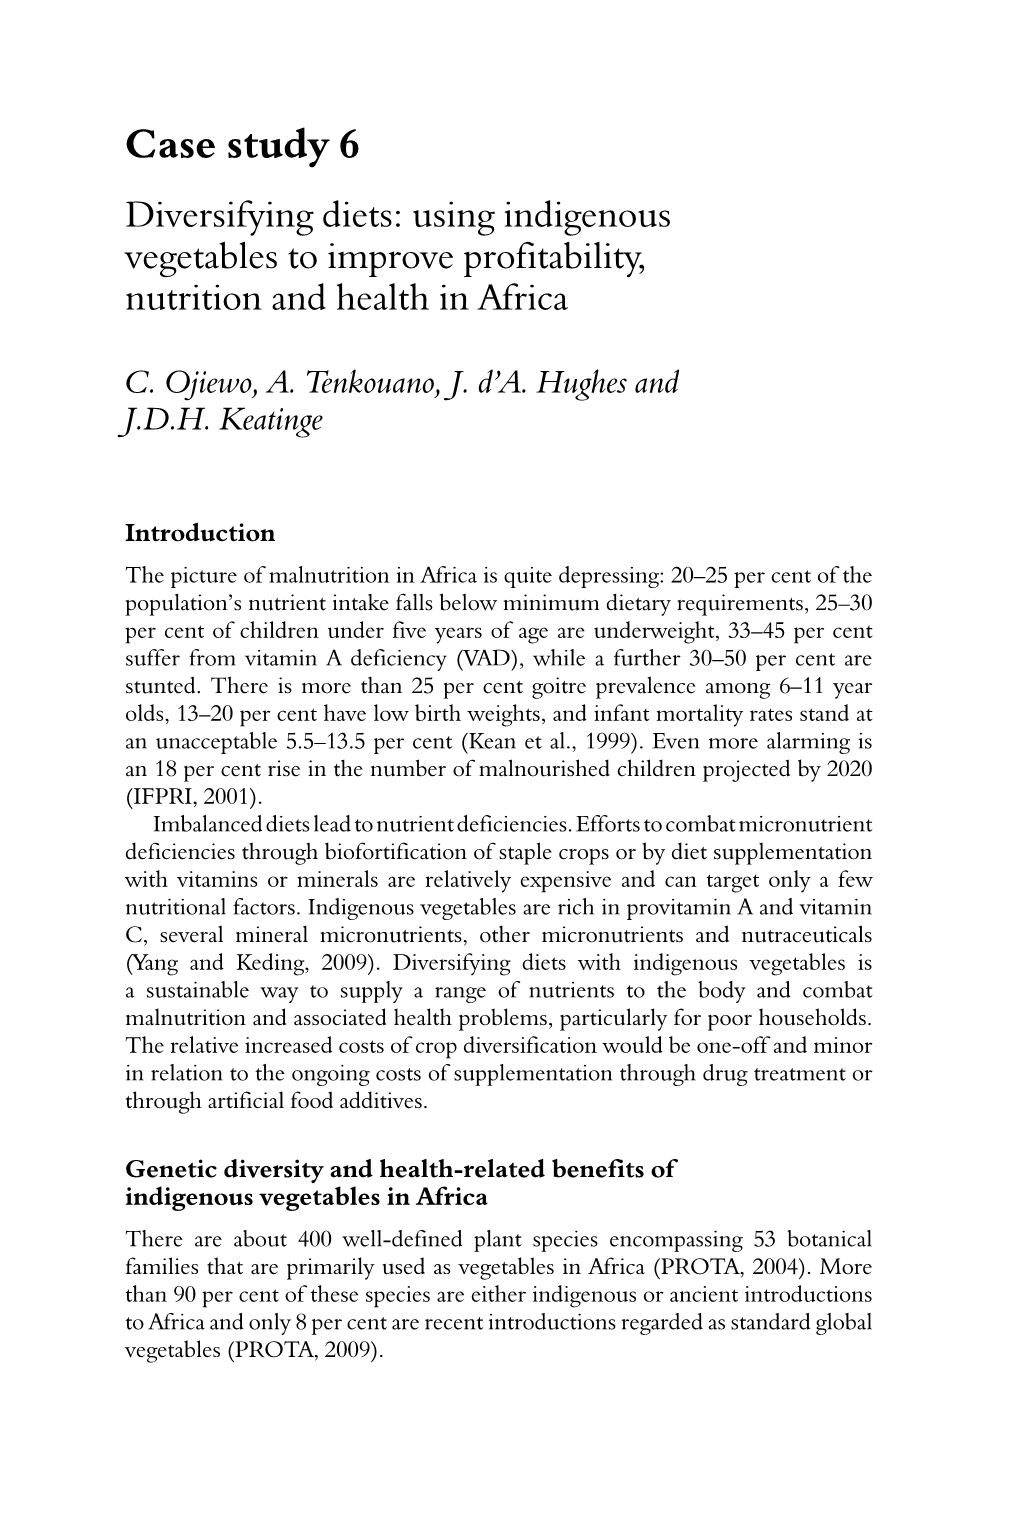 Case Study 6 Diversifying Diets: Using Indigenous Vegetables to Improve Profitability, Nutrition and Health in Africa